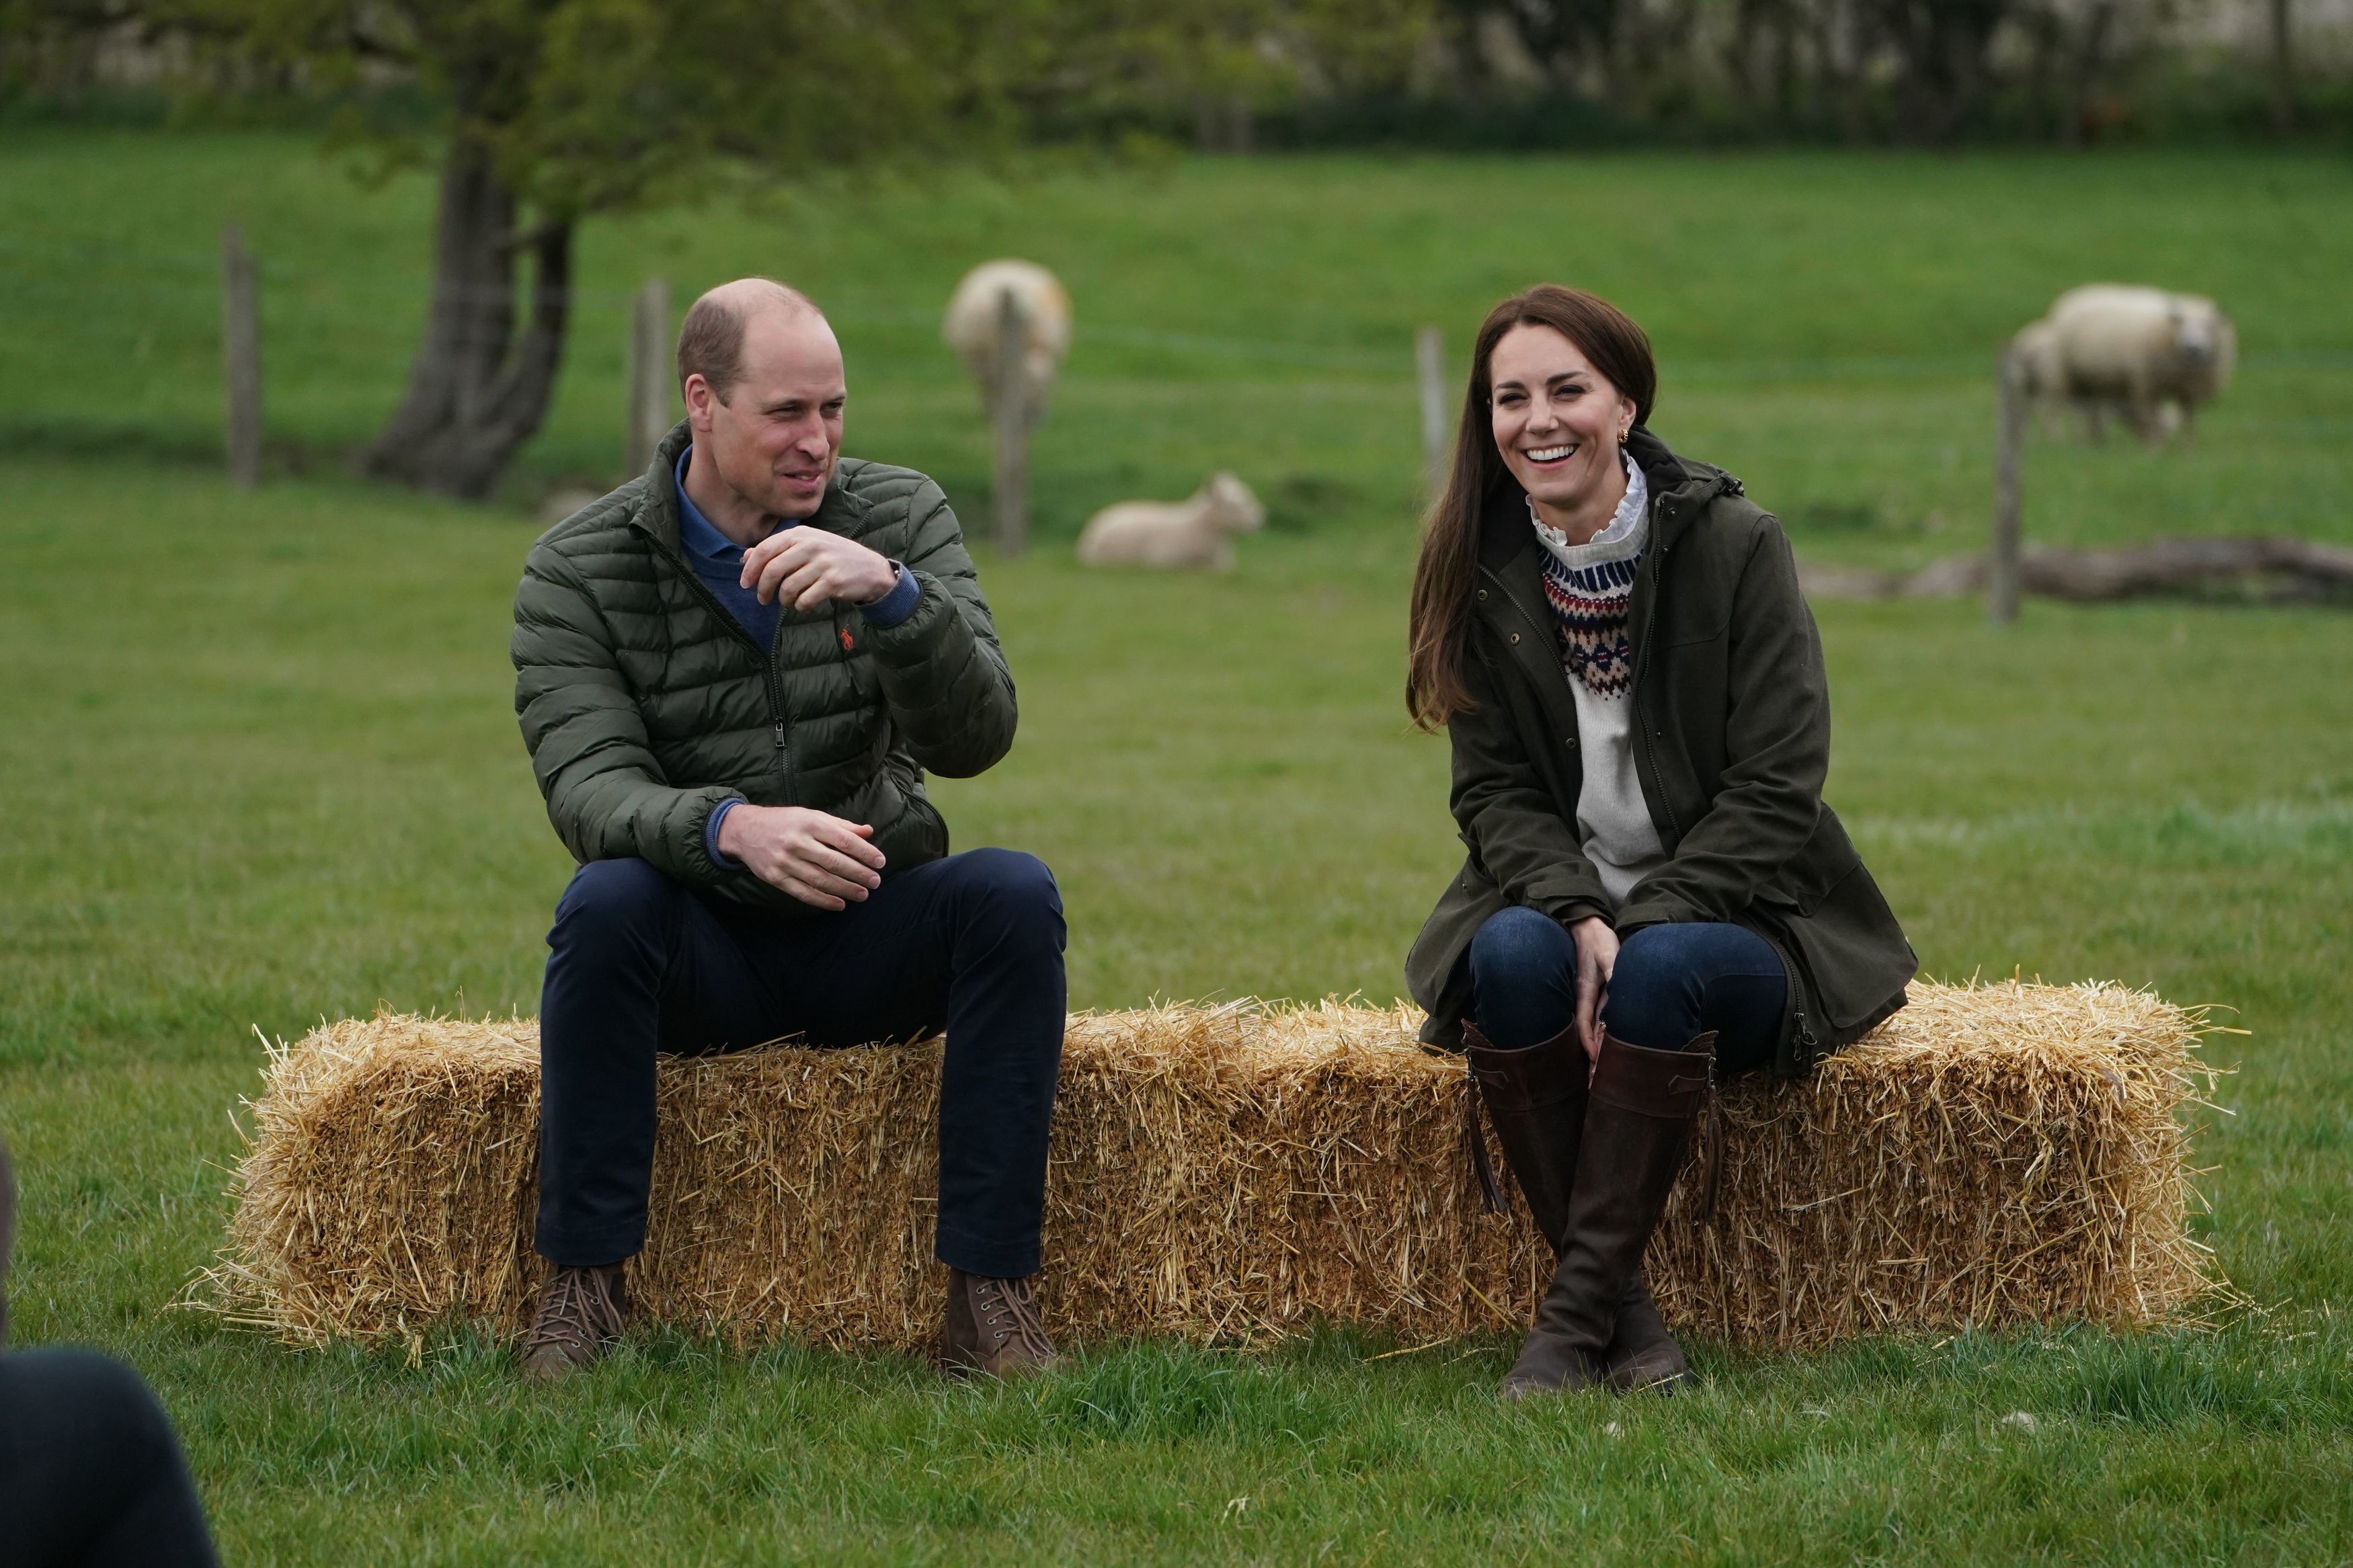 Prince William and his wife Kate Middleton at a royal visit to Manor Farm in Little Stainton, Durham on April 27, 2021 in Darlington, England. | Source: Getty Images